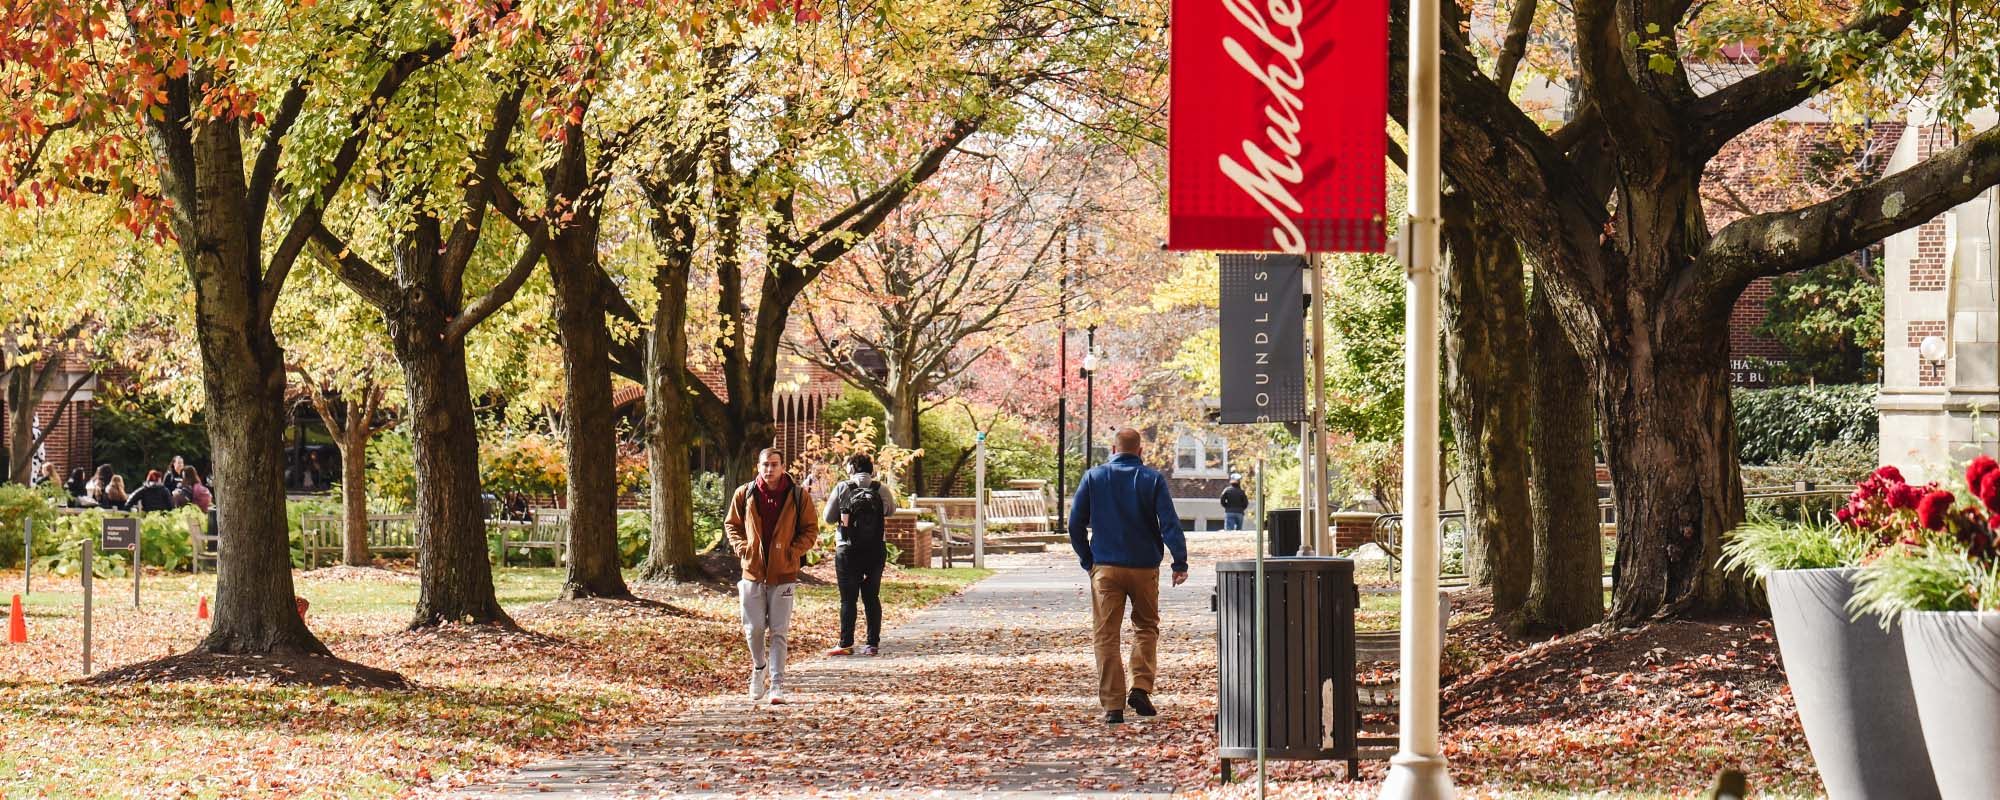 A few students walking along pathway underneath signage that reads 